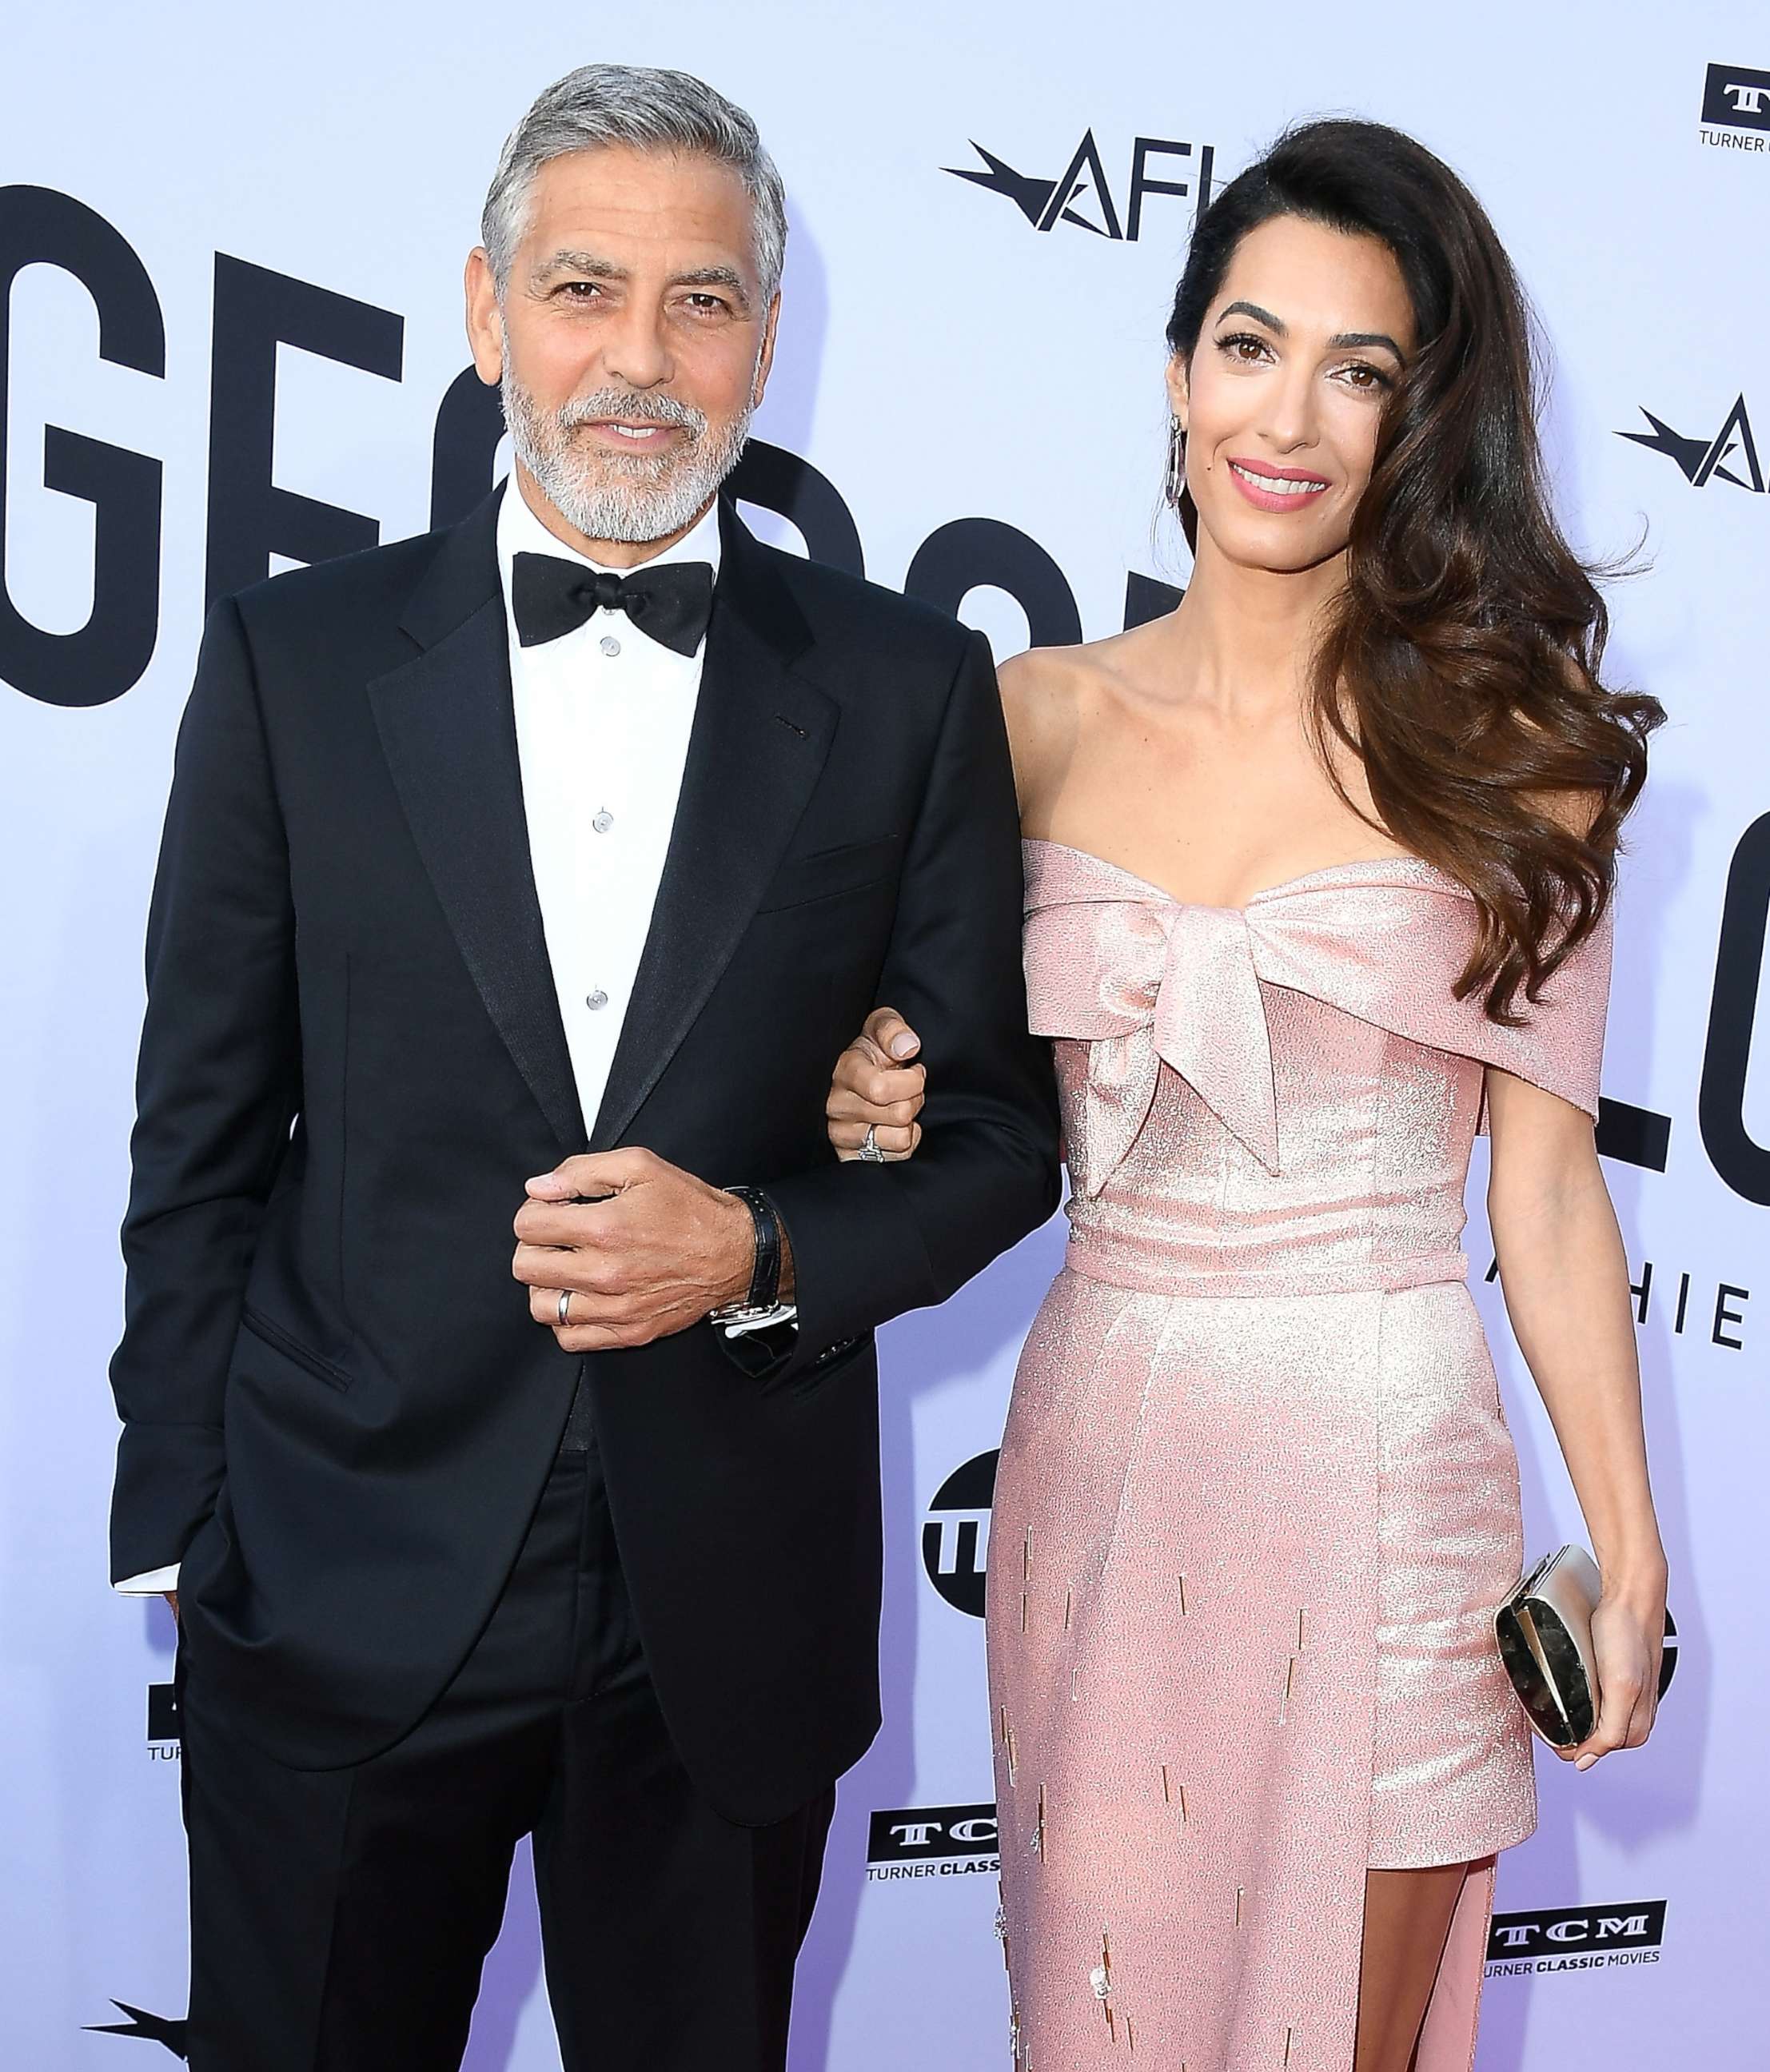 PHOTO: George Clooney and Amal Clooney arrive at the American Film Institute's 46th Life Achievement Award Gala Tribute To George Clooney, June 7, 2018, in Hollywood, Calif.